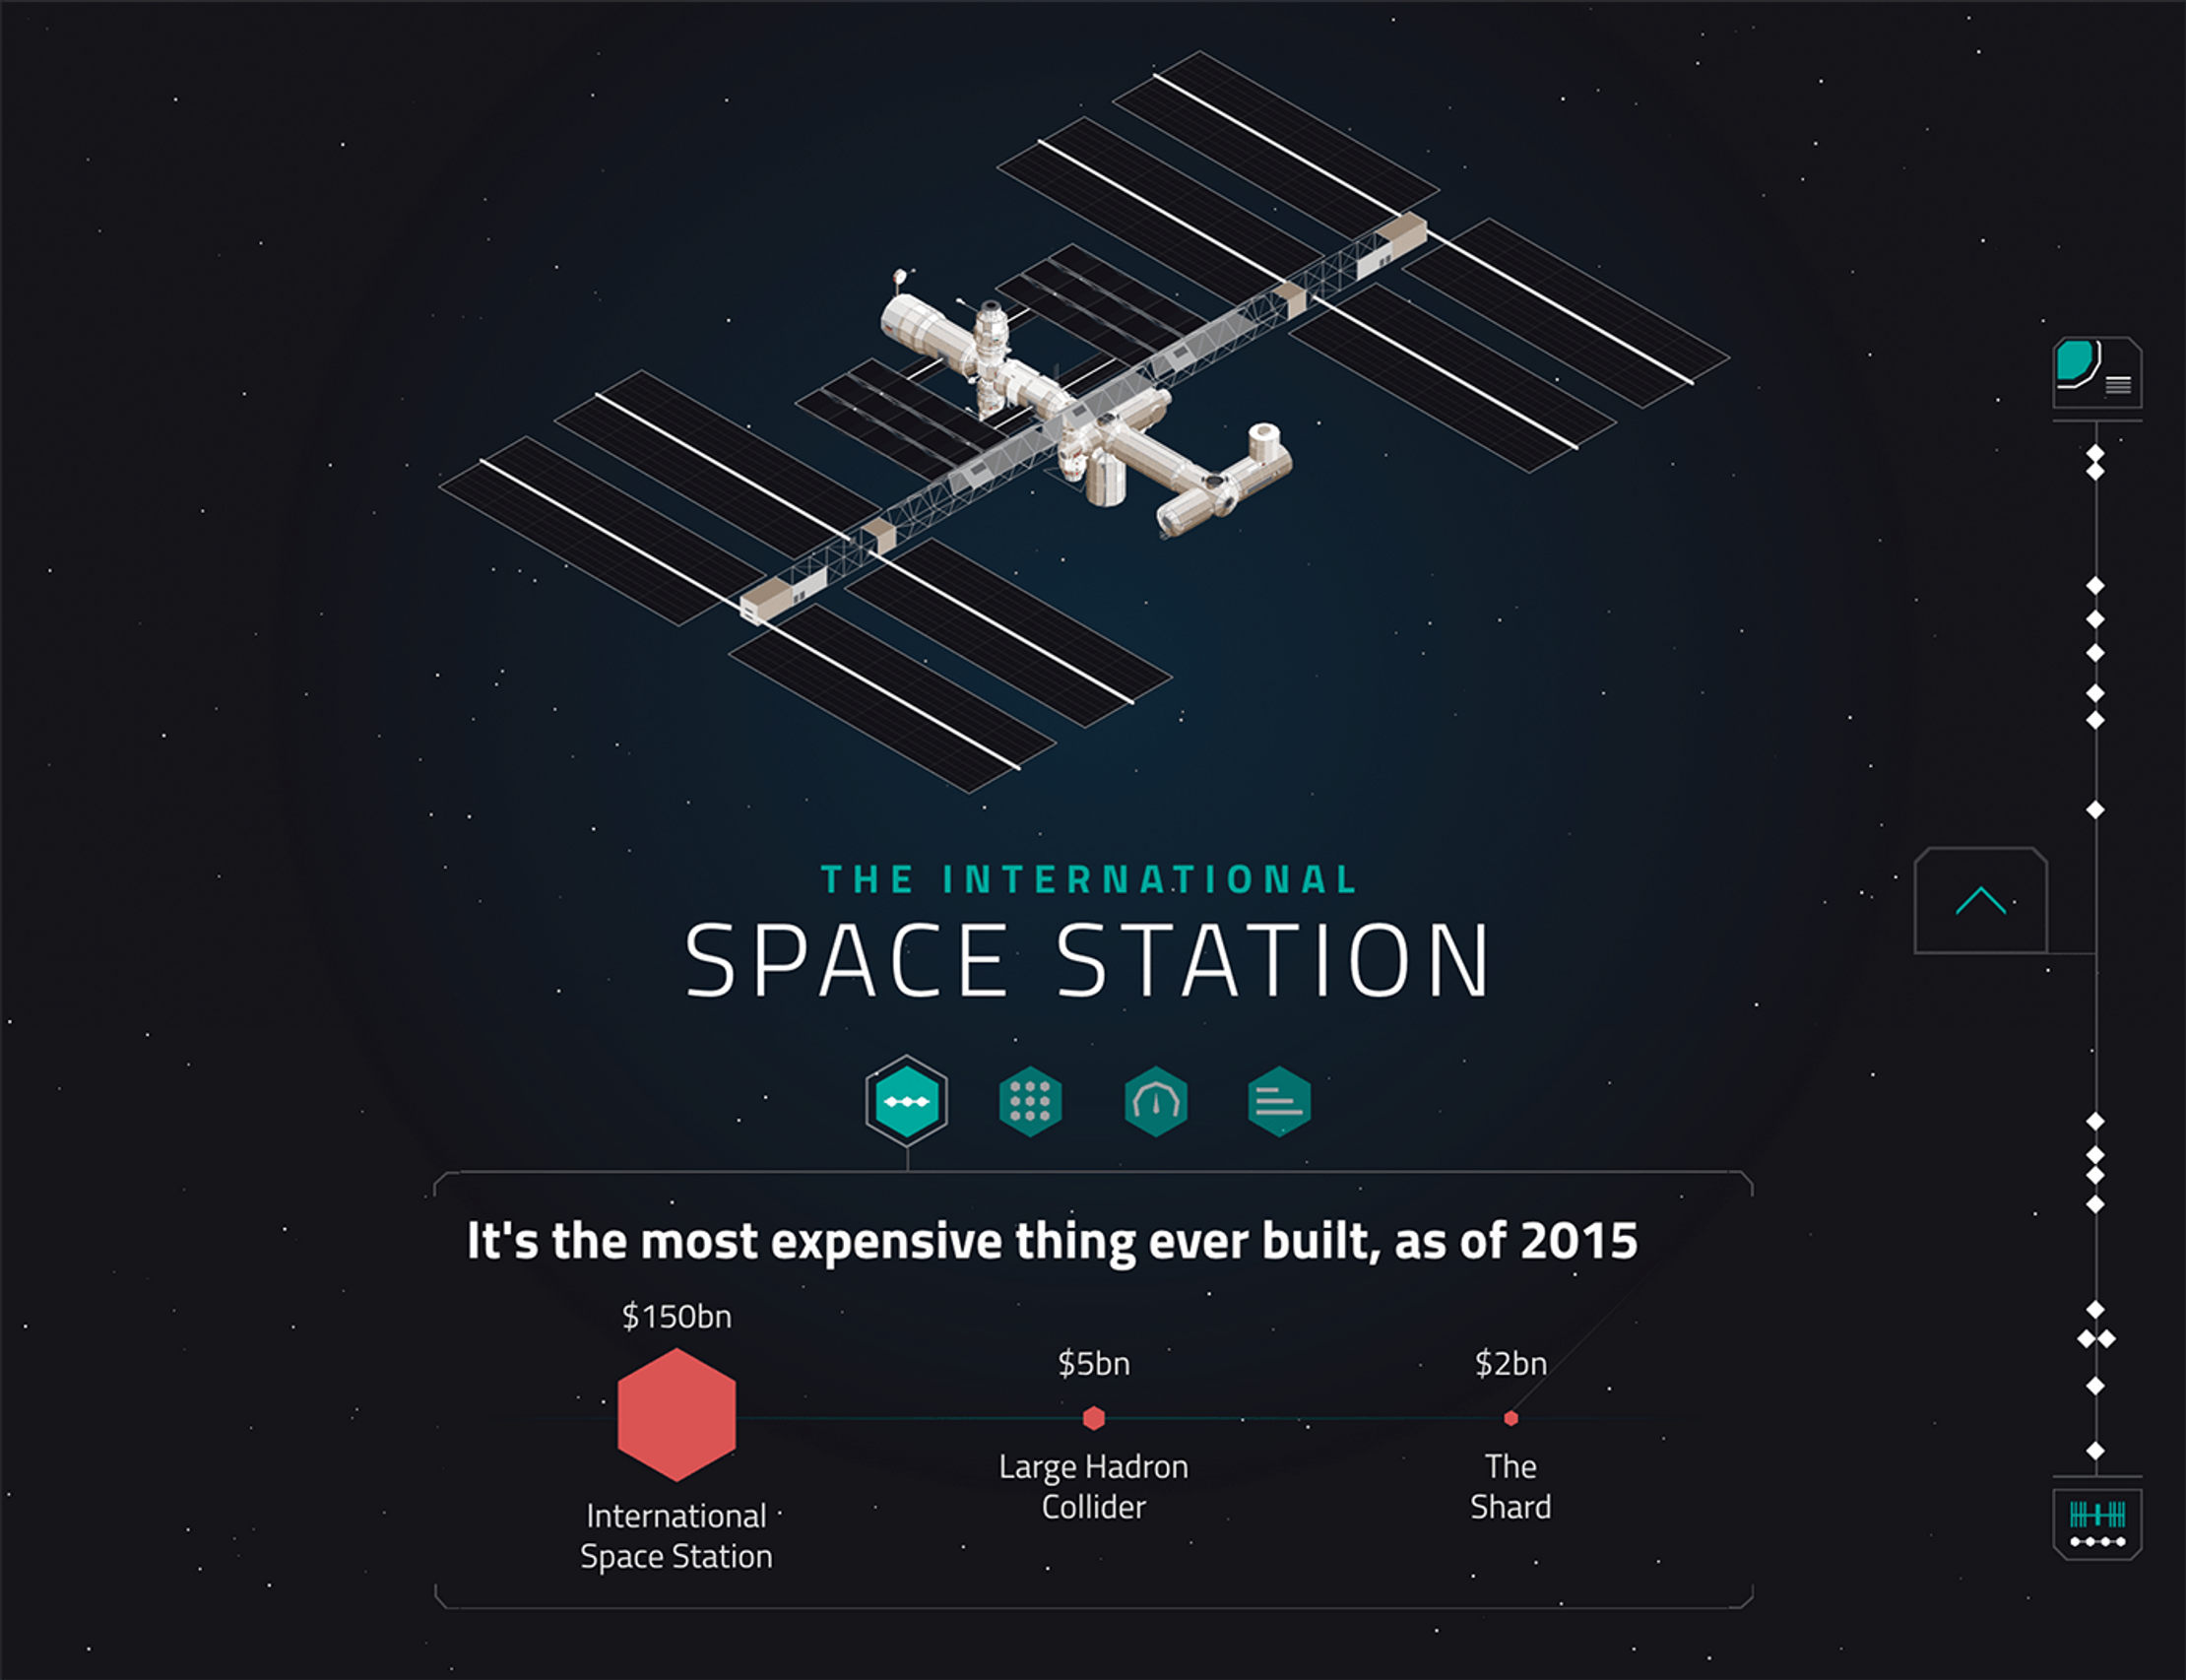 A screenshot of the homepage for the Living Space website. It features a low-poly graphic of the International Space Station above the websites title - The International Space Station.